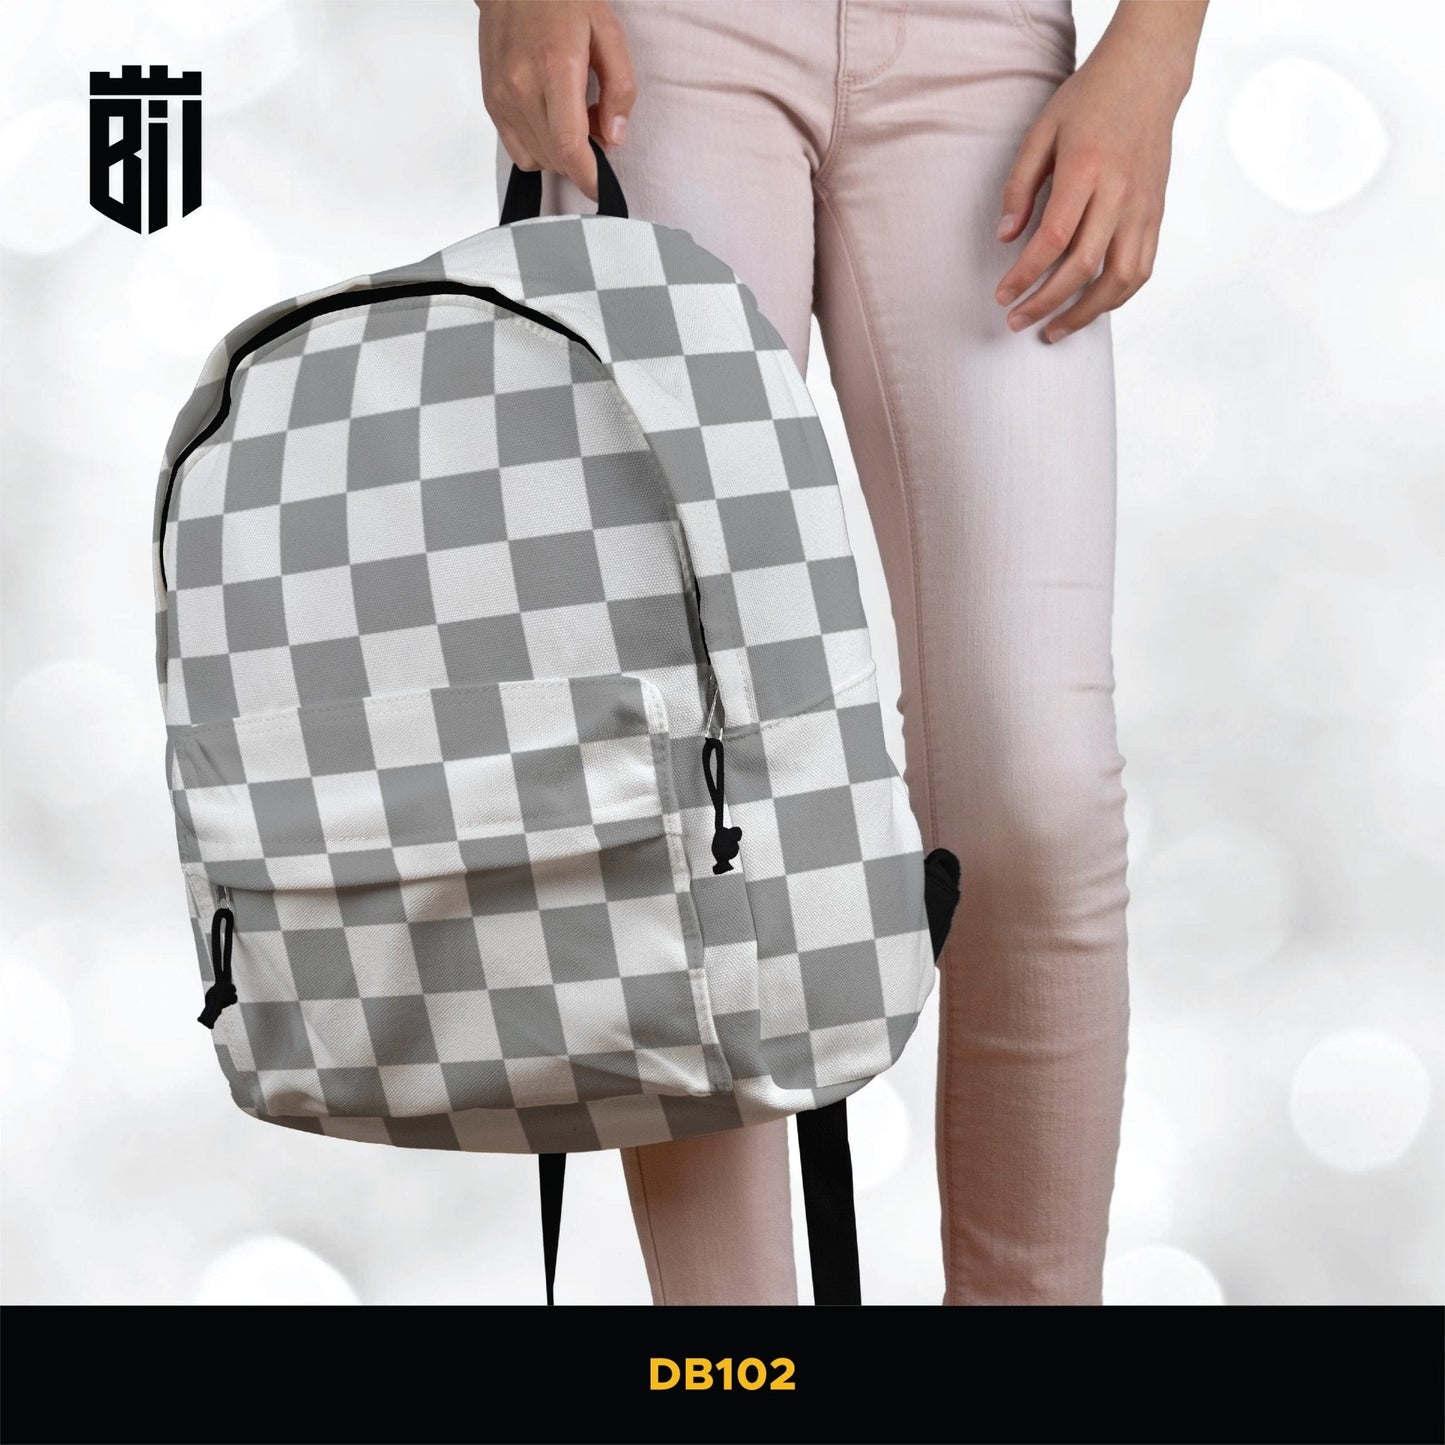 DB102 Grey White Checkered Allover Printed Backpack - BREACHIT